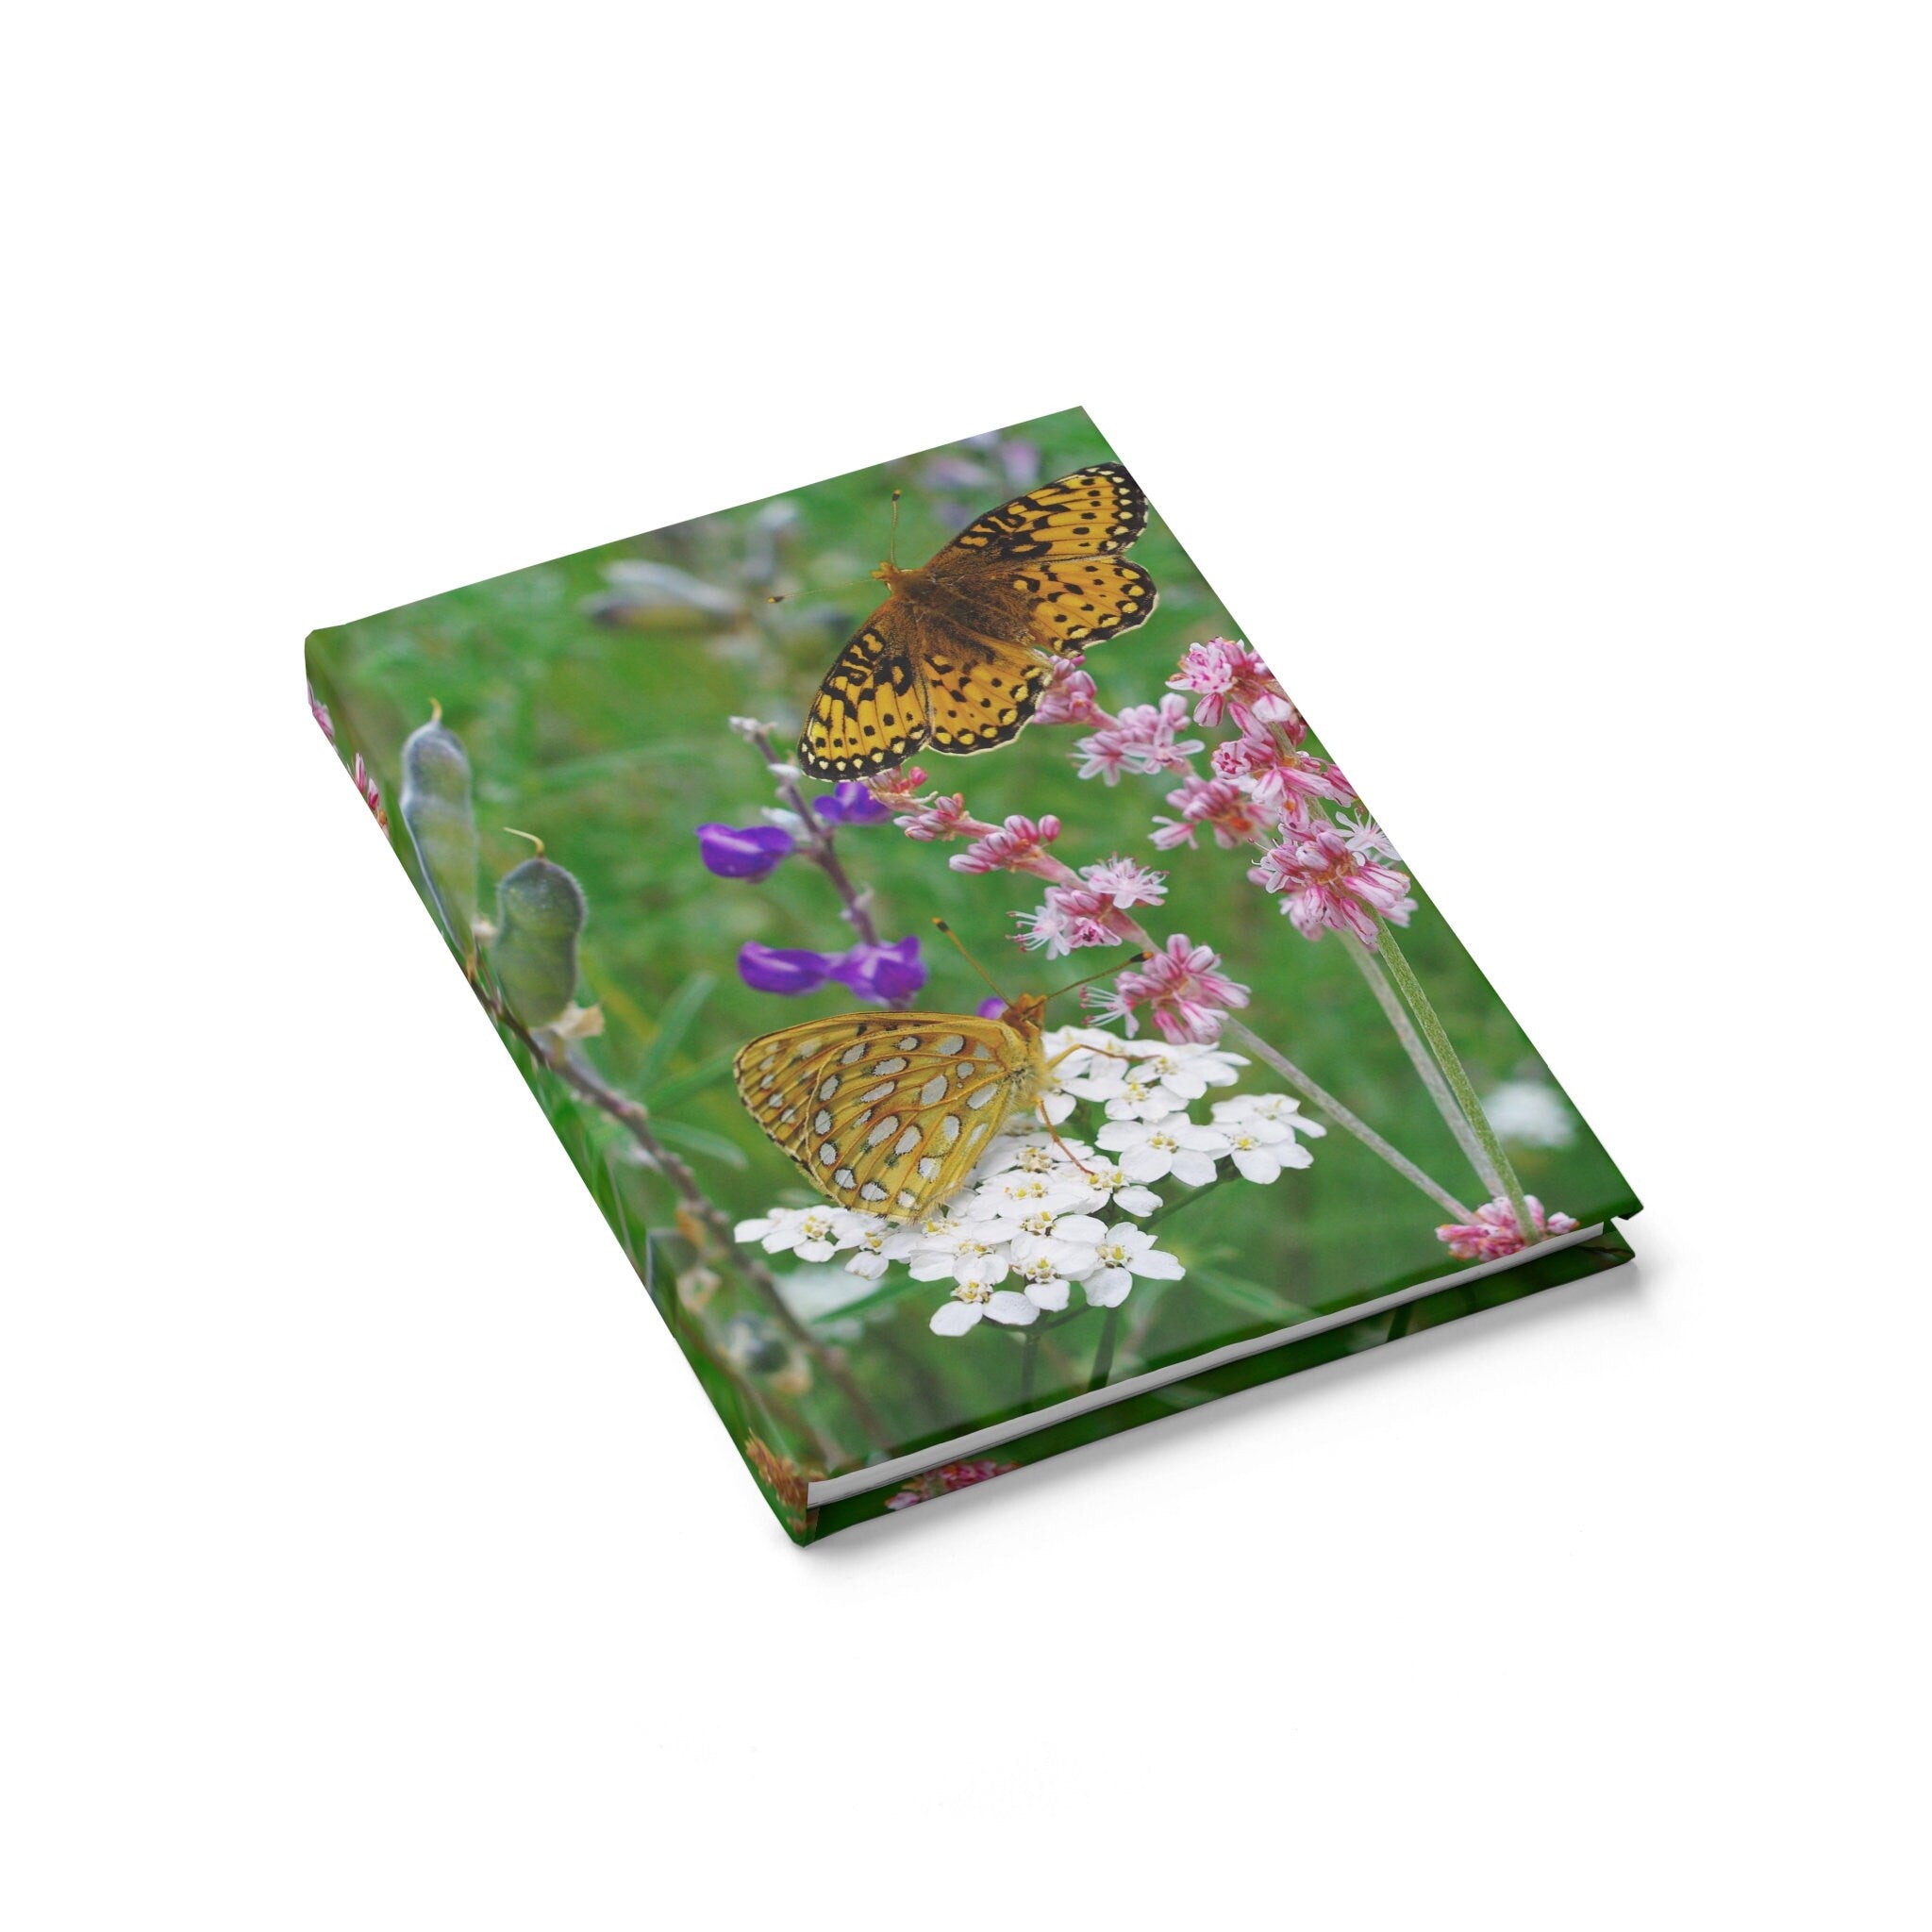 Wildflowers And Butterflies Notebook - Spiral or Hard Cover